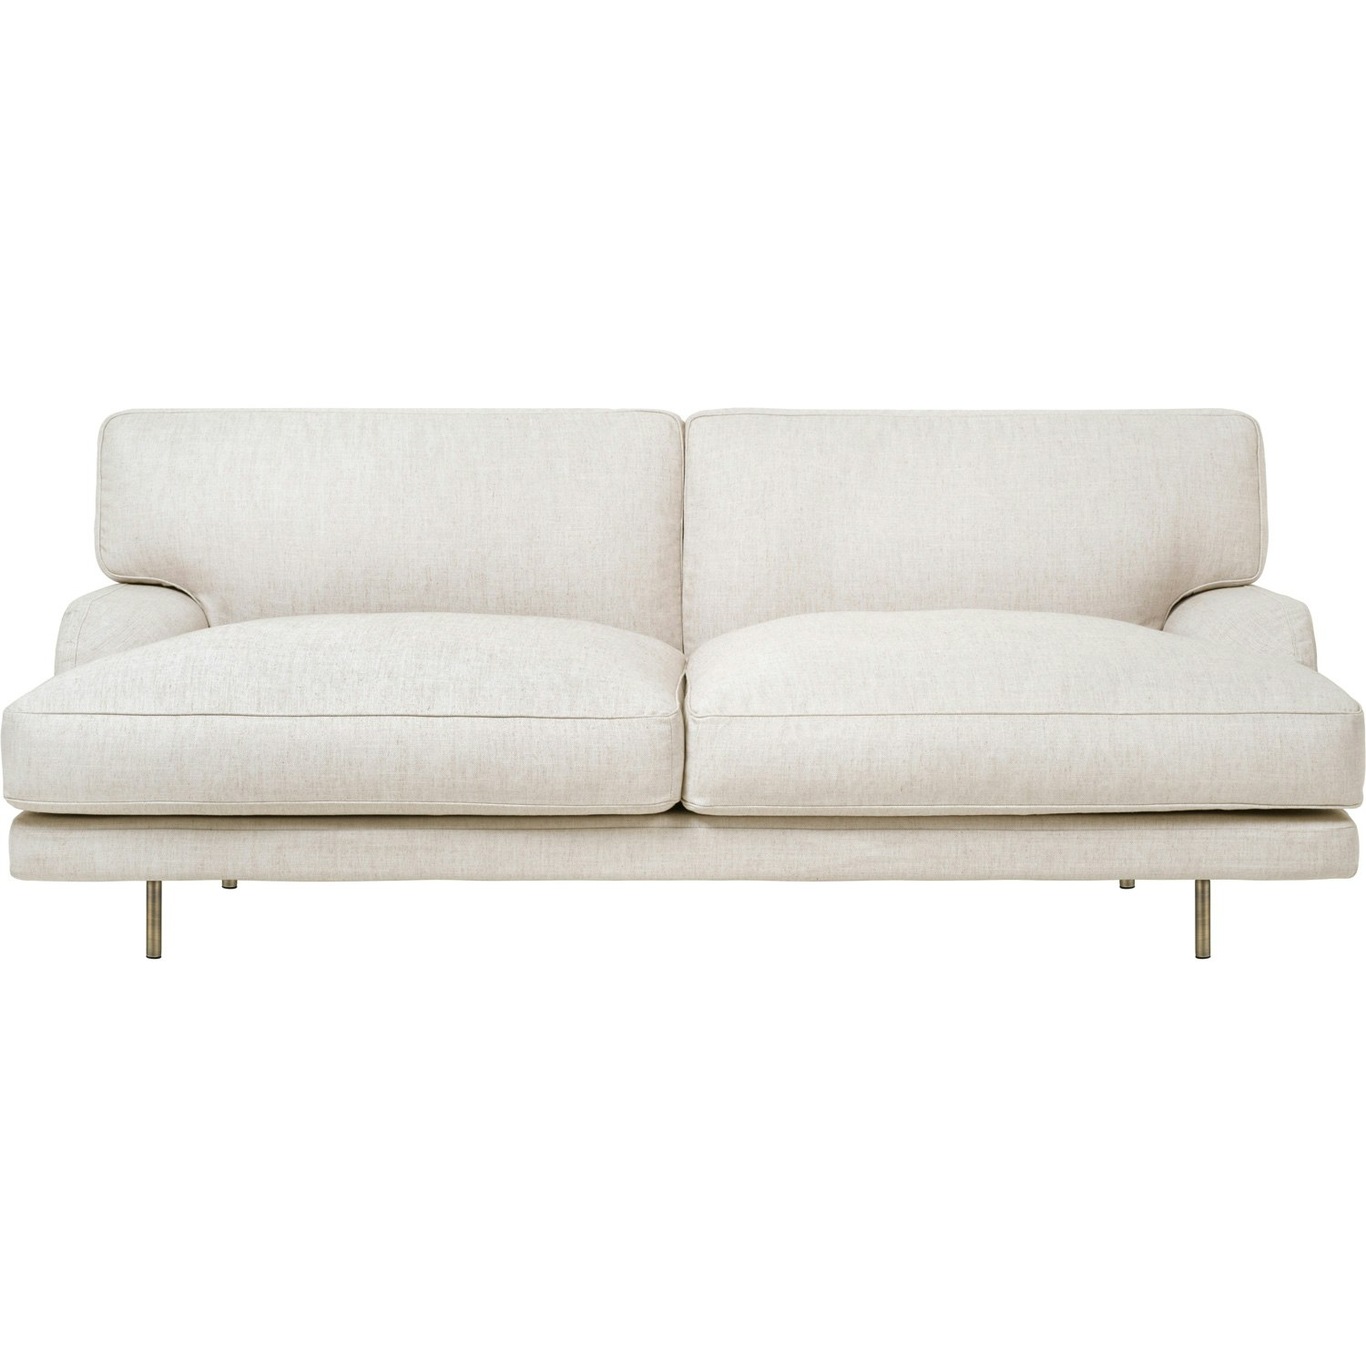 Flaneur Sofa FC 2-Seater, Legs Brass / Hot Madison 419 Off White